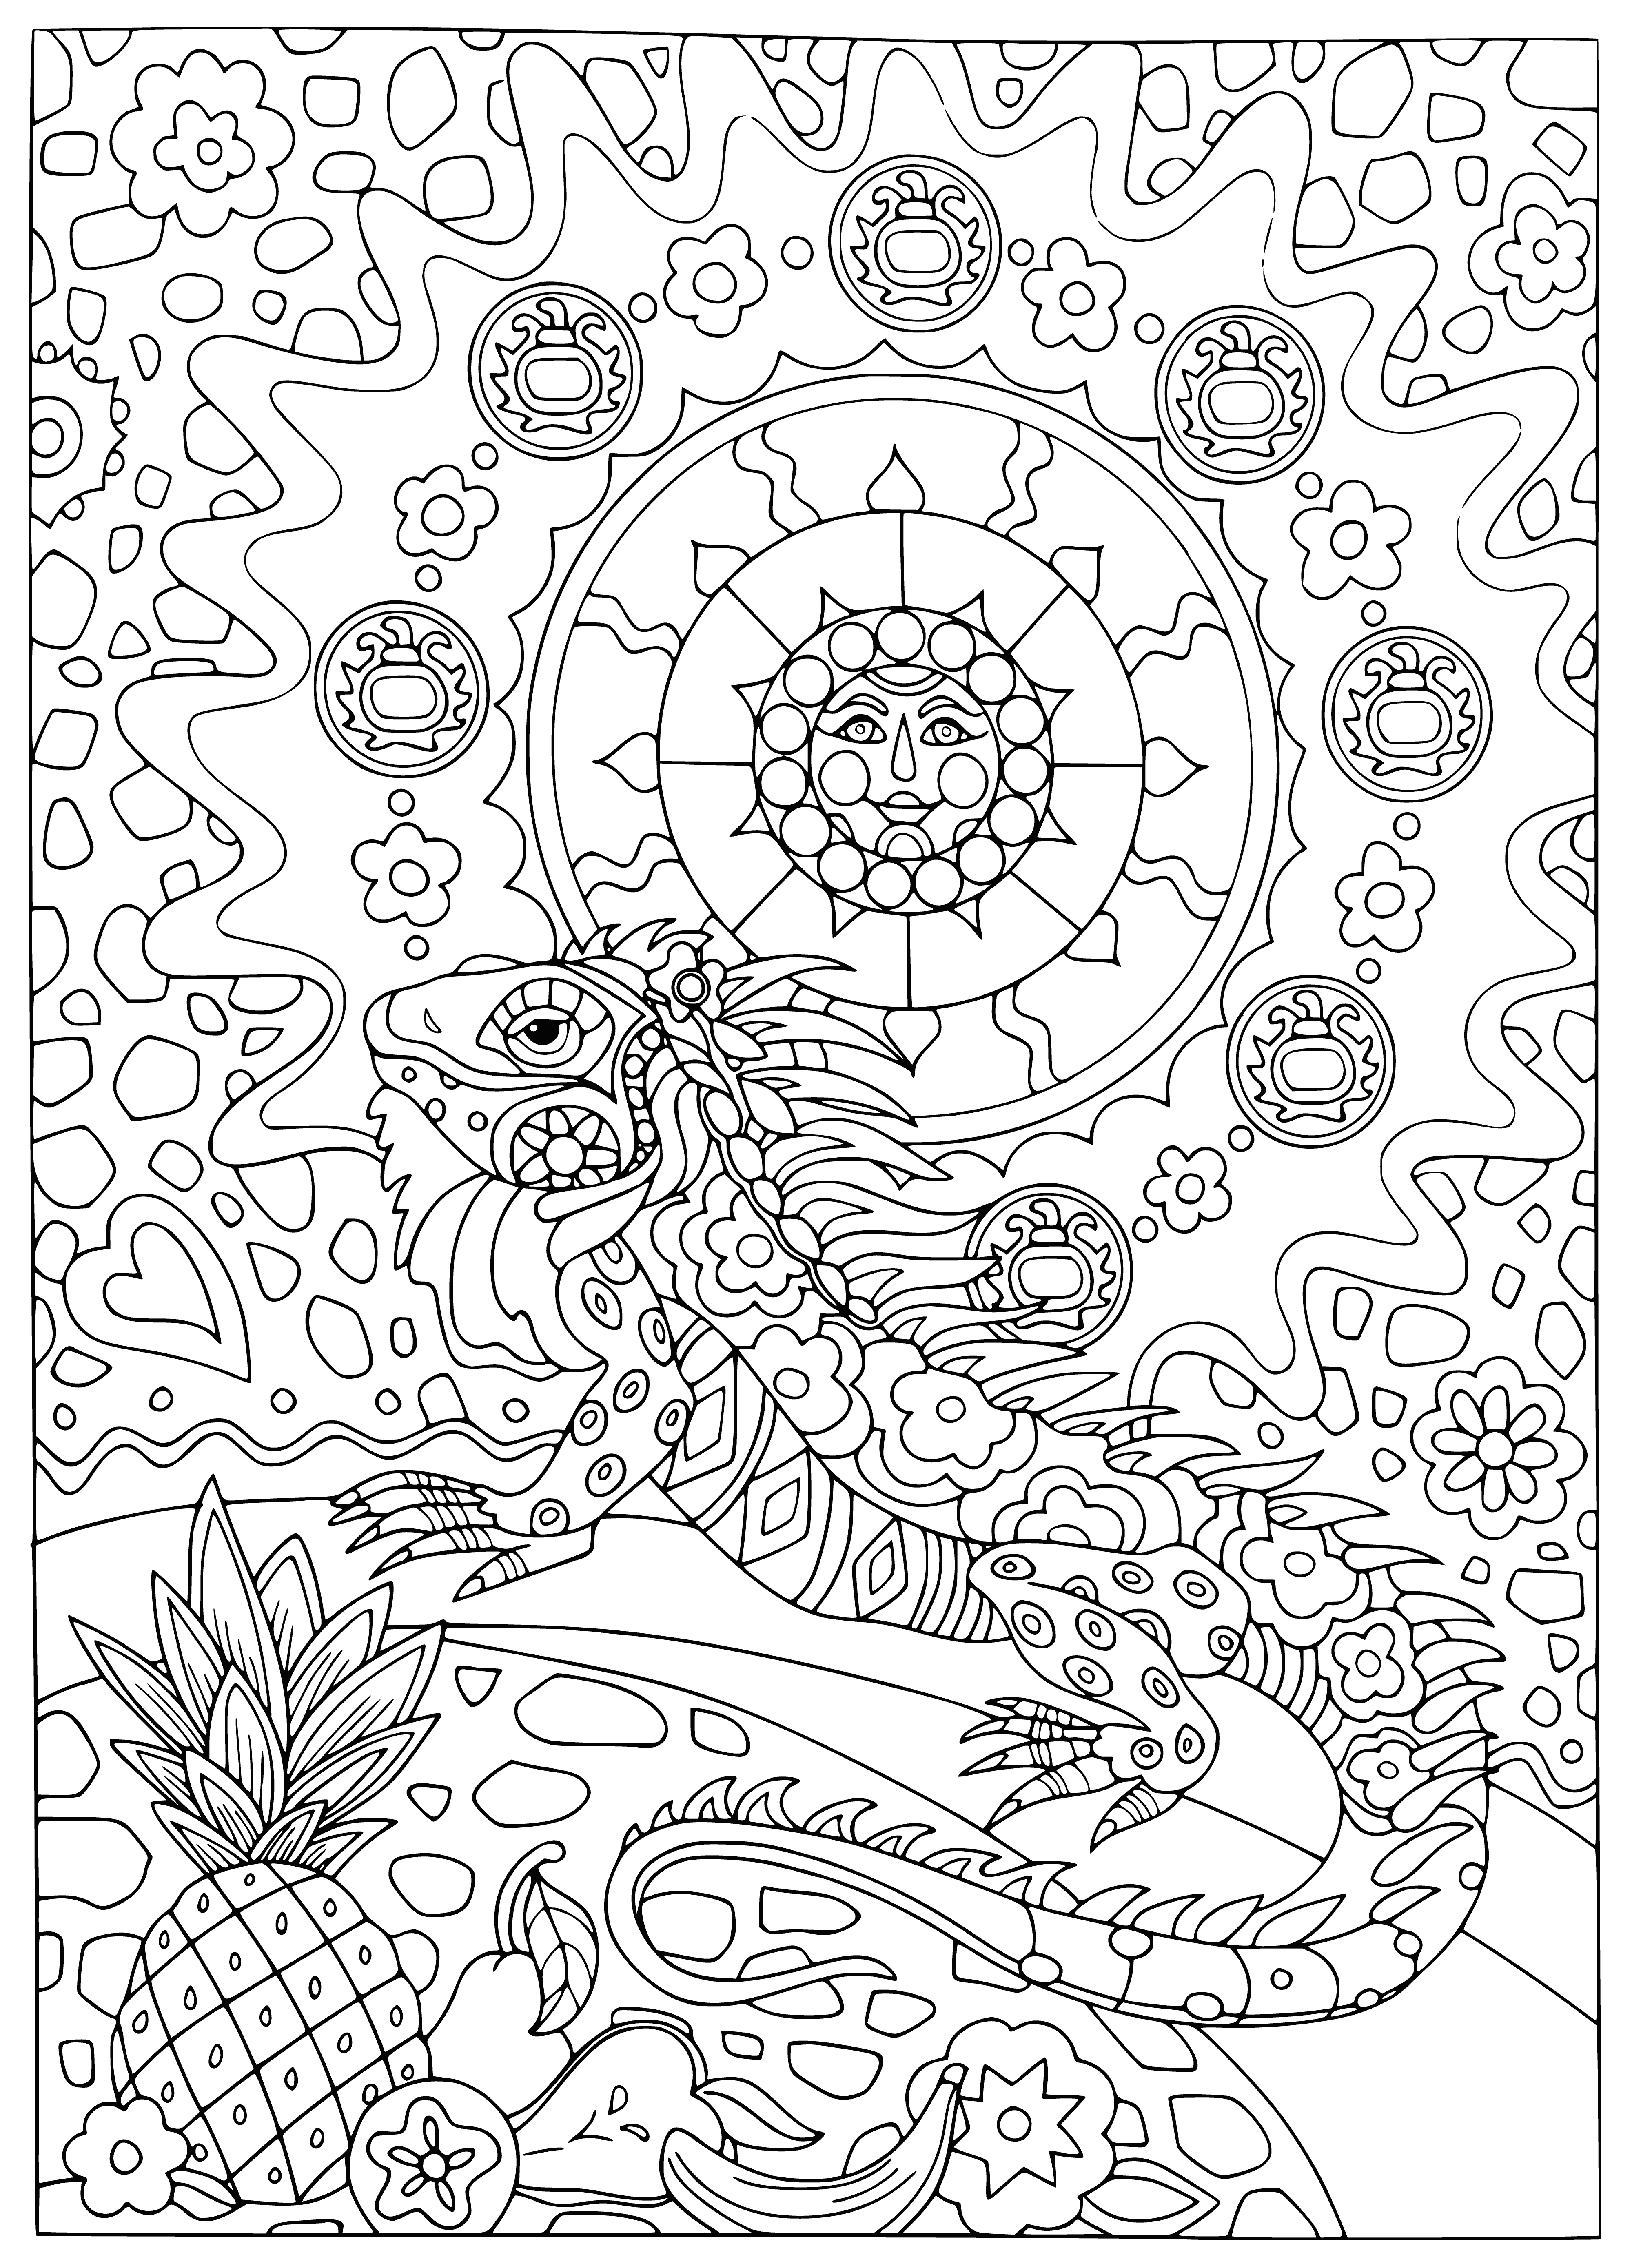 Iguana coloring page